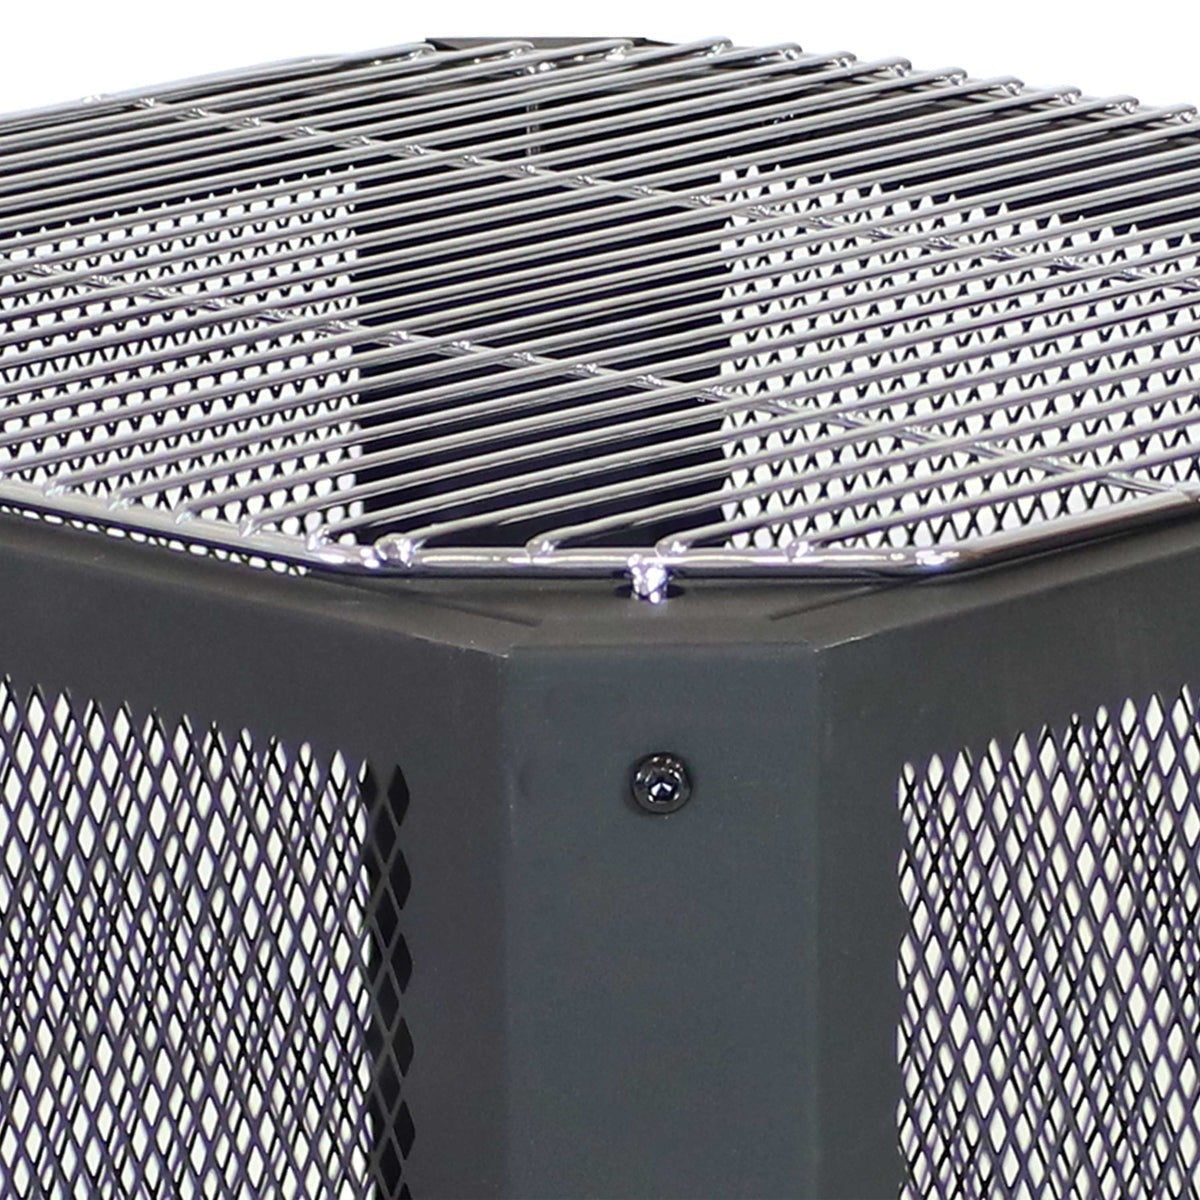 Outdoor > Outdoor Decor > Fire Pits - 16 Inch Small Grelha Square Outdoor Fire Pit With Grilling Grate